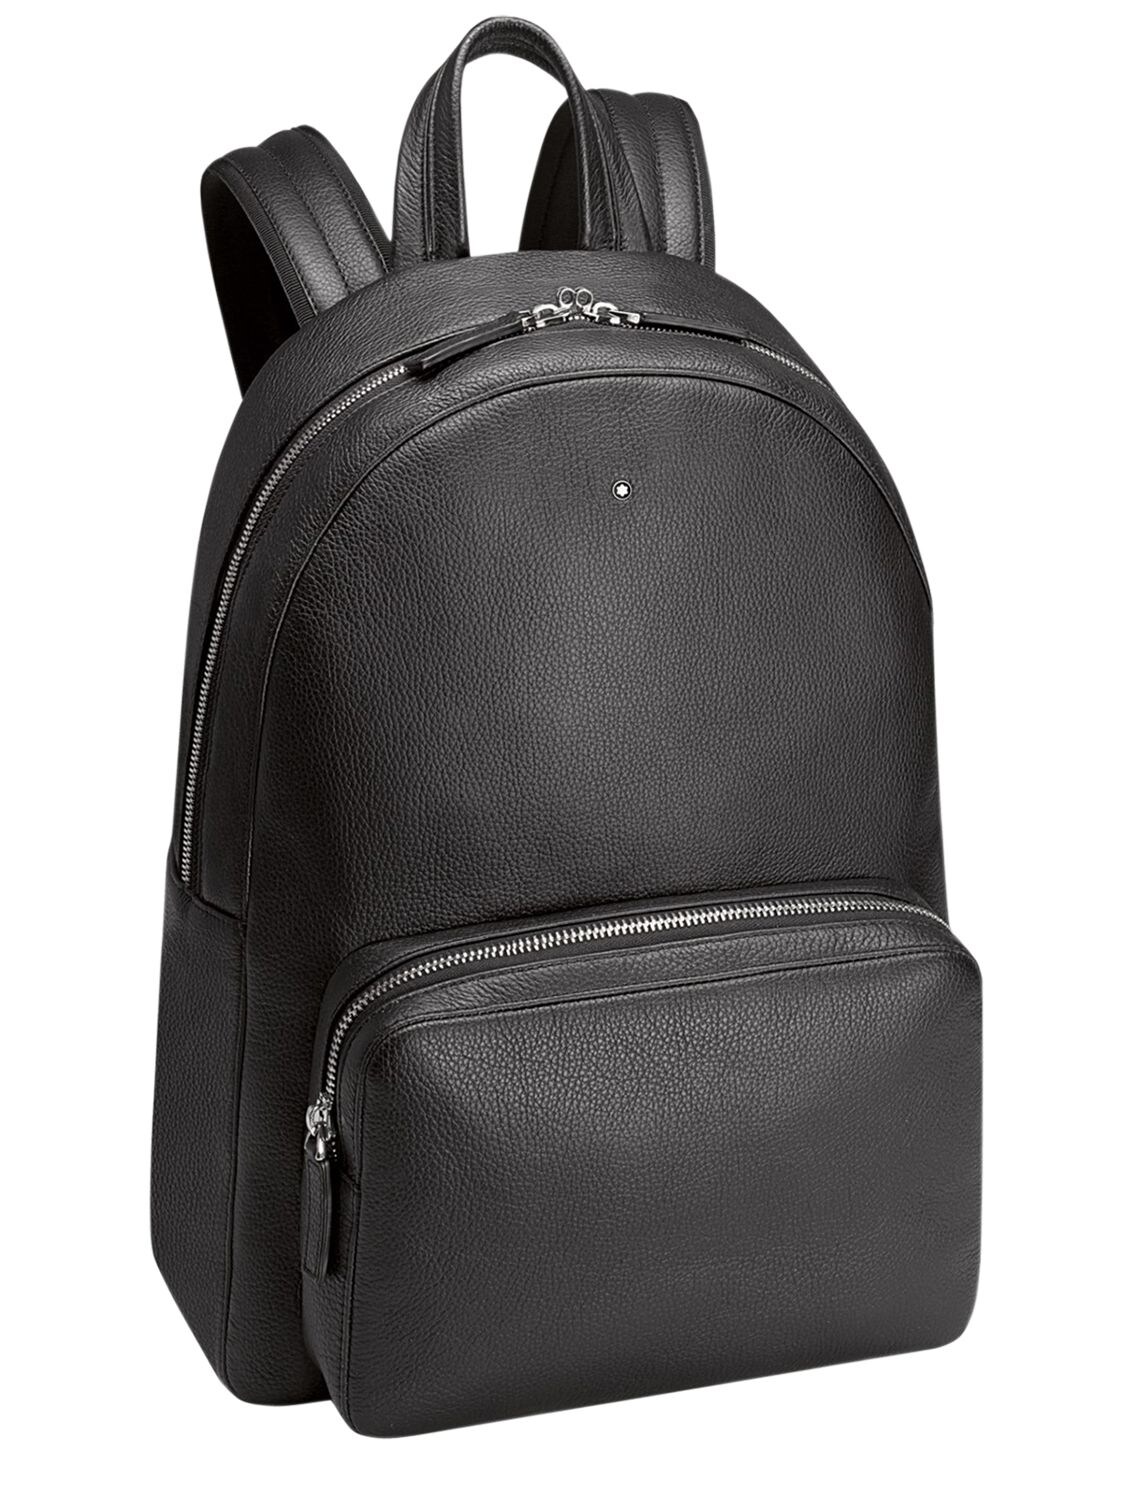 Montblanc Meisterstück Softgrain Leather Backpack In Black